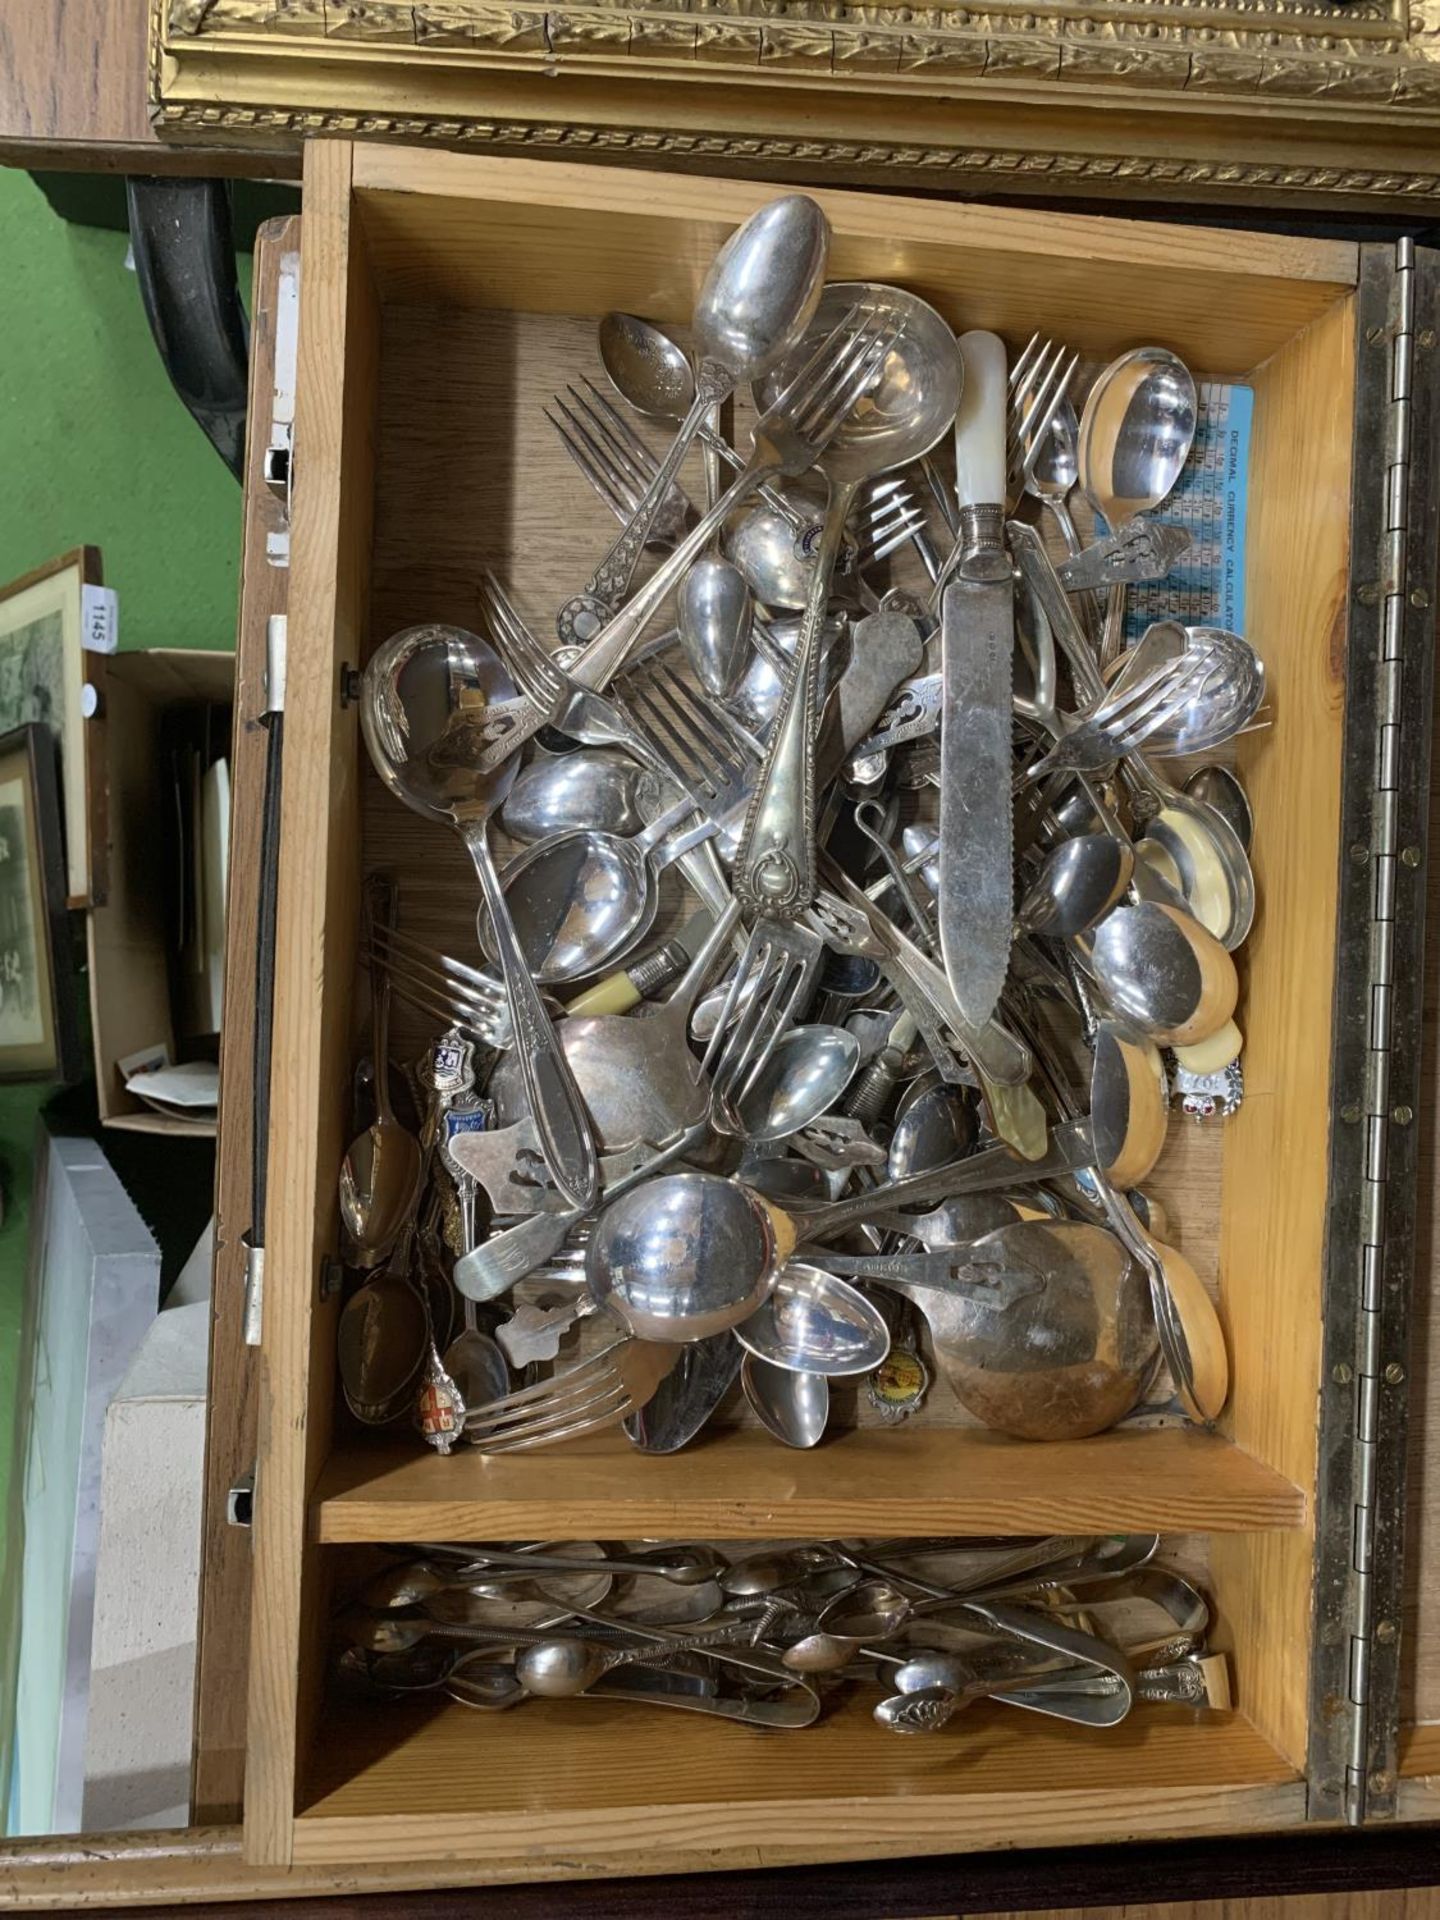 A QUANTITY OF VINTAGE FLATWARE TO INCLUDE A LARGE AMOUNT OF SUGAR TONGS, IN A WOODEN BOX - Image 2 of 4